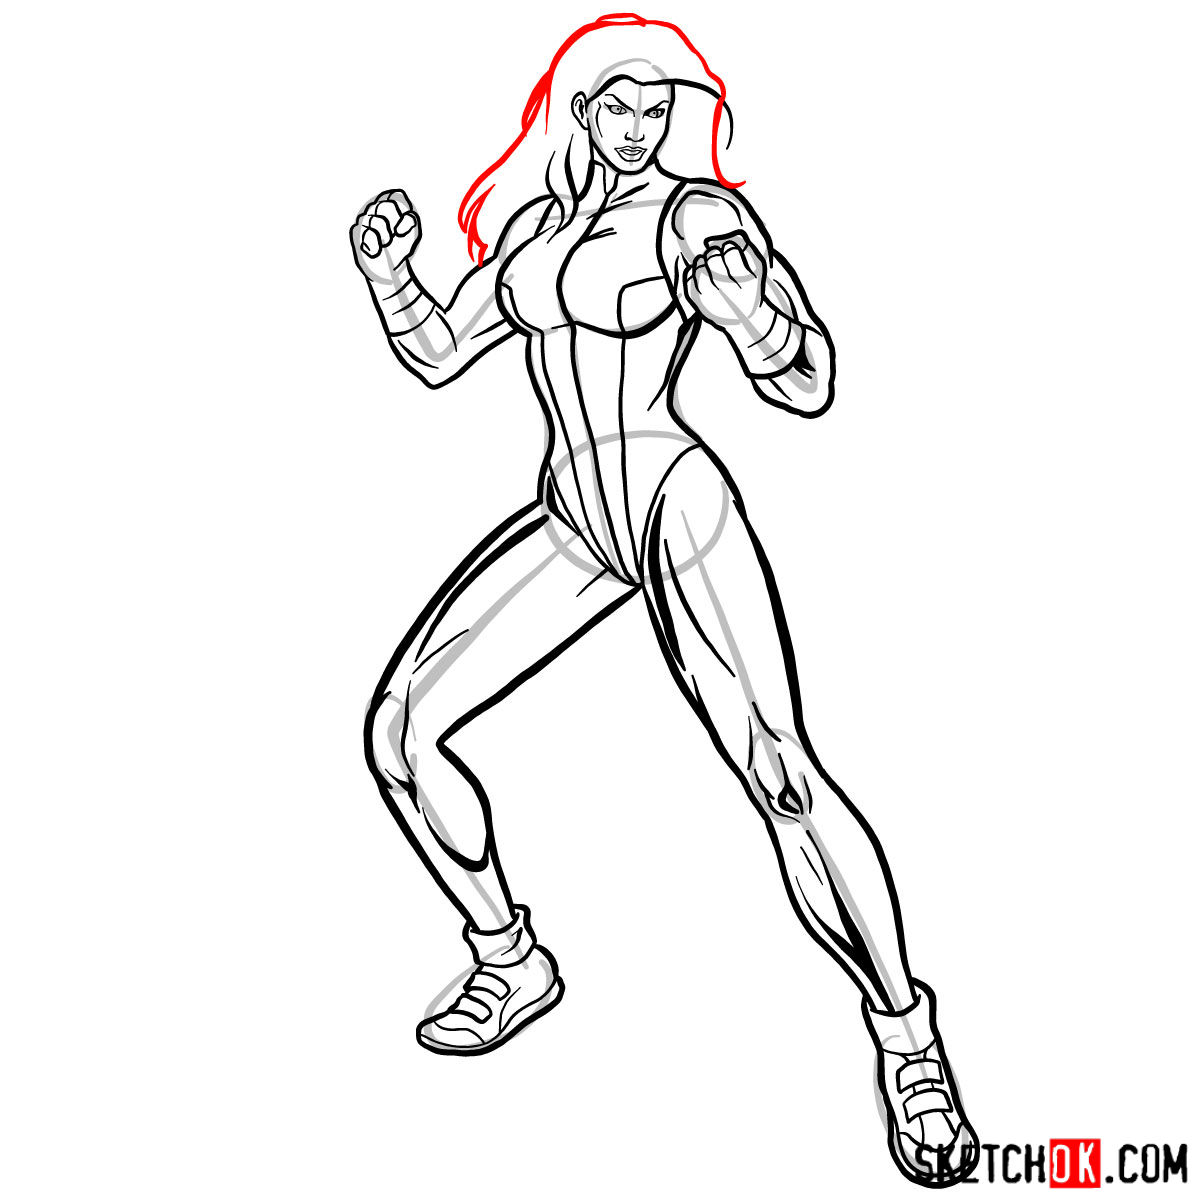 How to draw She-Hulk (Jennifer Walters) from Marvel - step 13